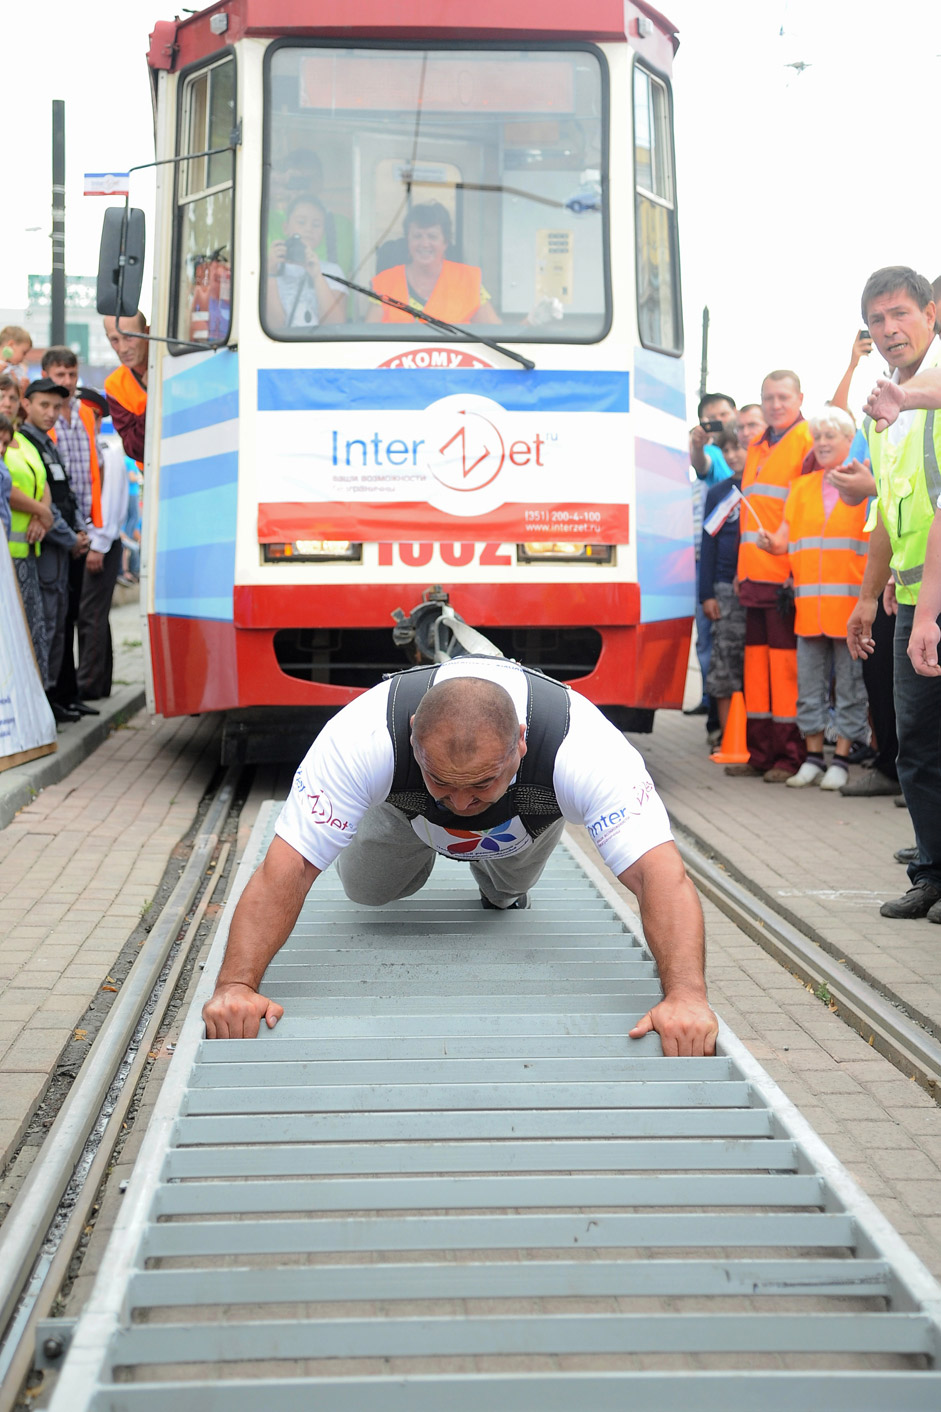 The four-time winner of tournament "The most powerful man in Russia" Elbrus Nigmatullin sets a new world record for the rod of 6 trams in strip 20 meters during the show in Chelyabinsk. 